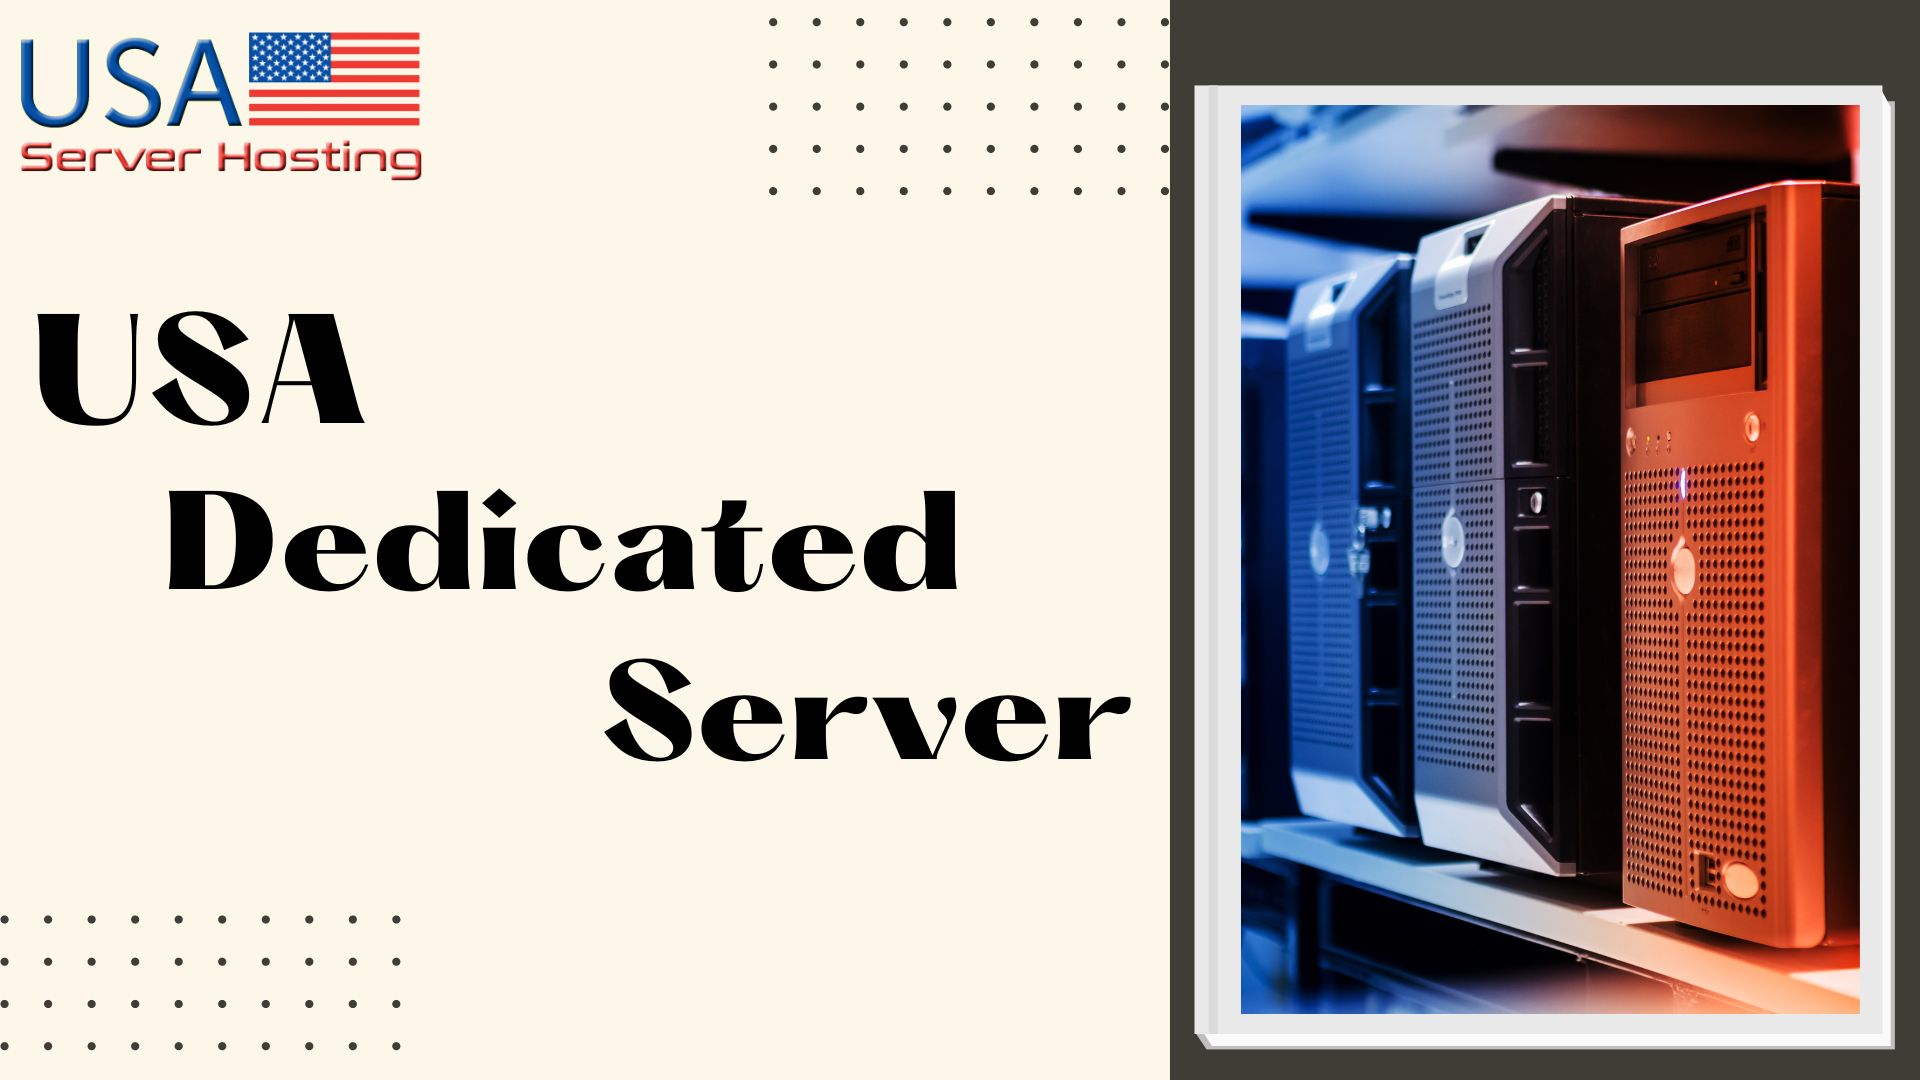 Contain the Excellent USA Dedicated Server Supported Event Powered by USA Server Hosting, Online Event